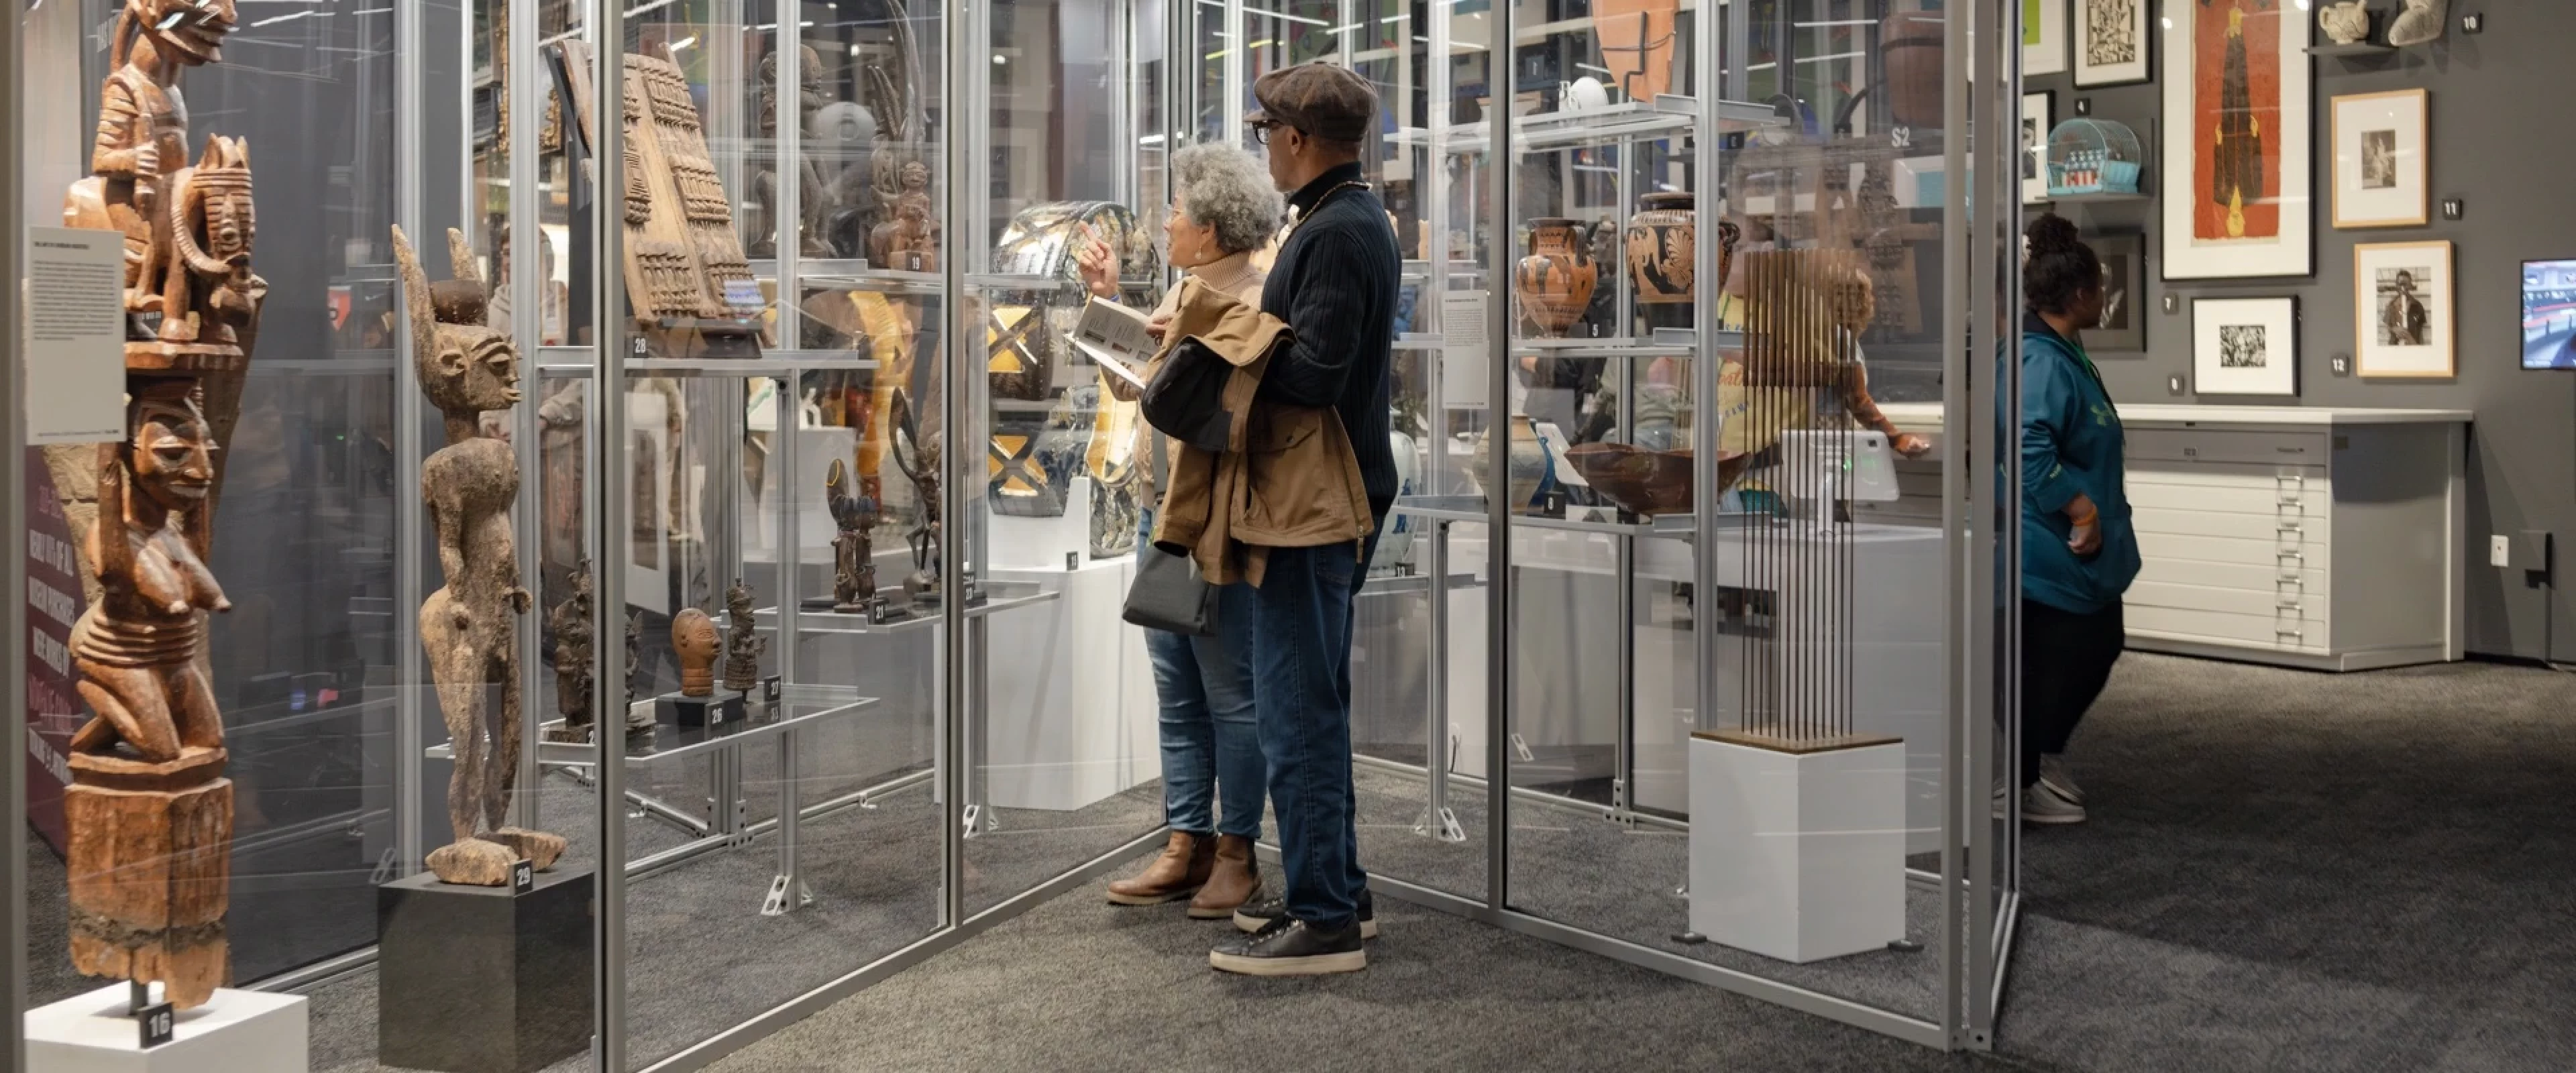 Two adults looking at collection of historic sculptures